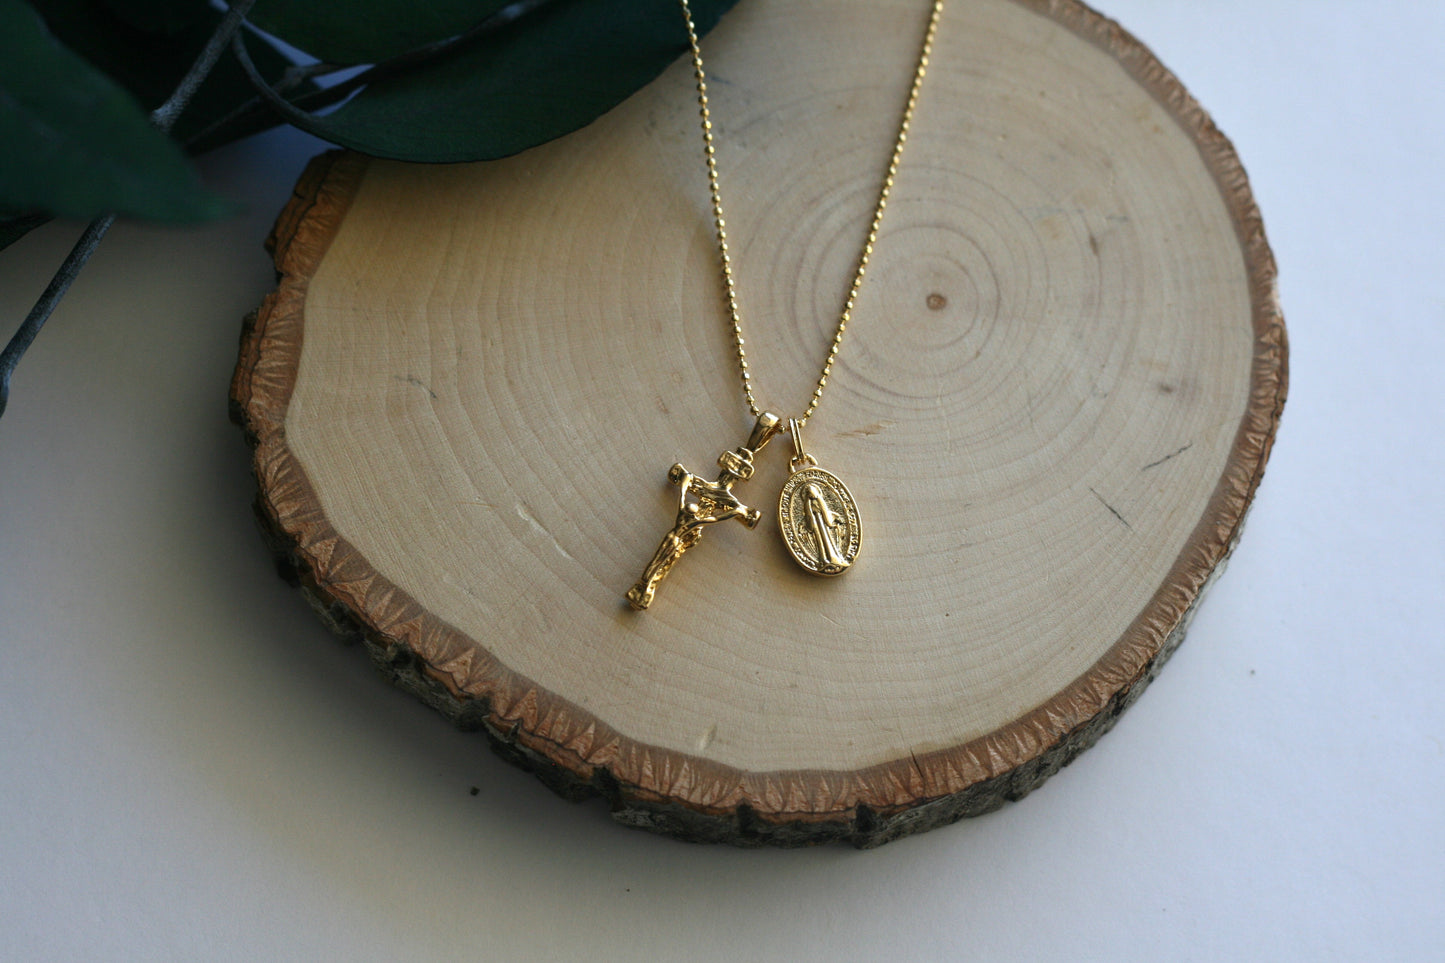 Gold Devotion Necklace with Crucifix and Miraculous Medal